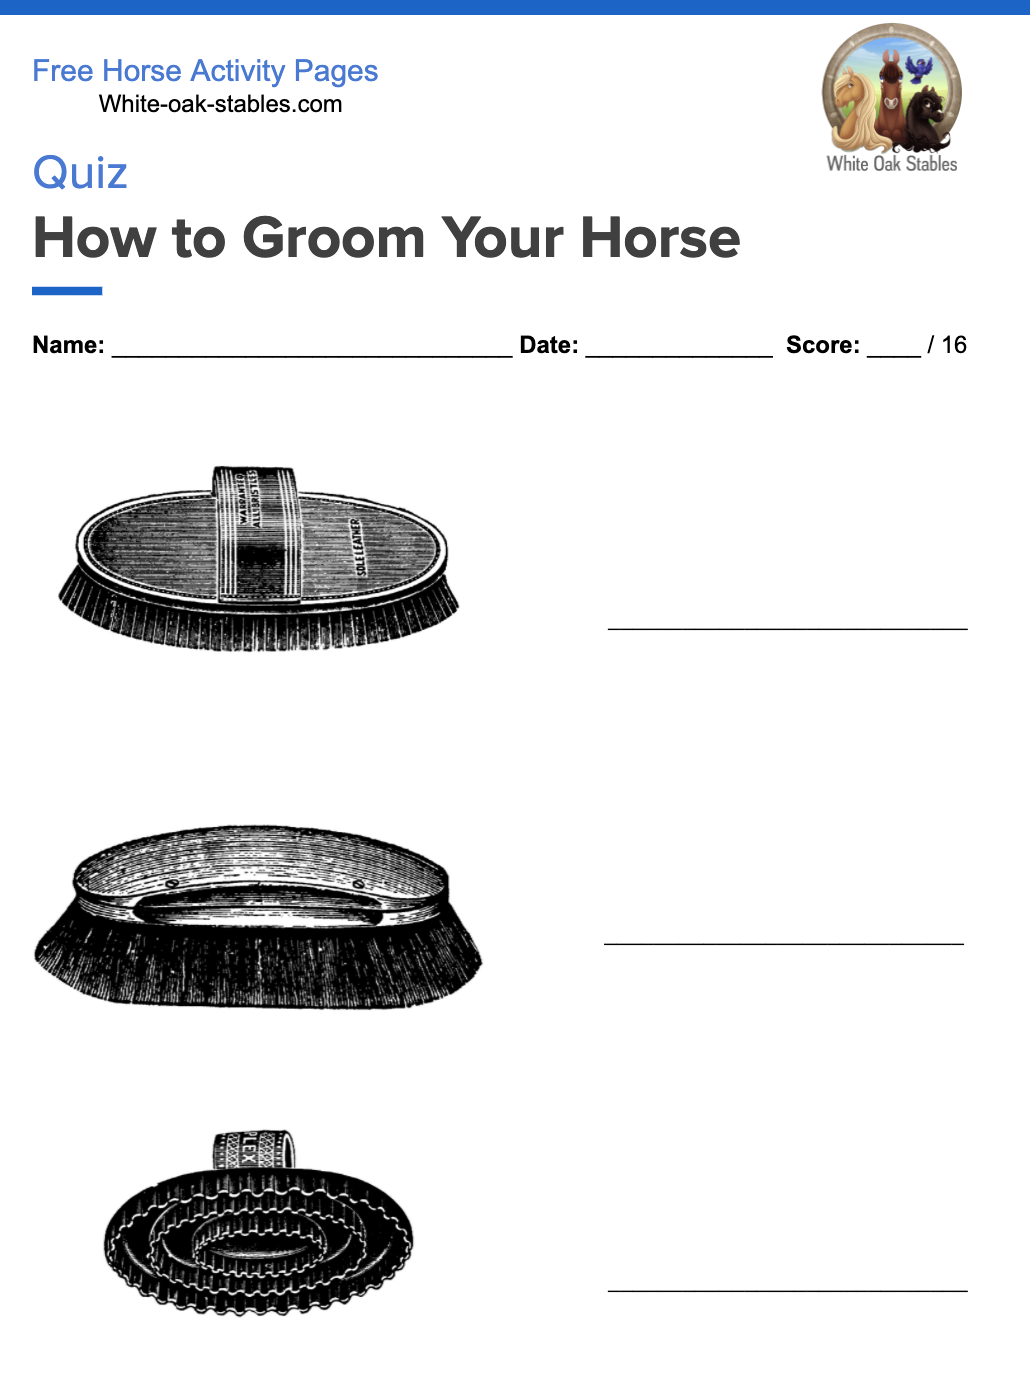 Quiz – How to Groom Your Horse